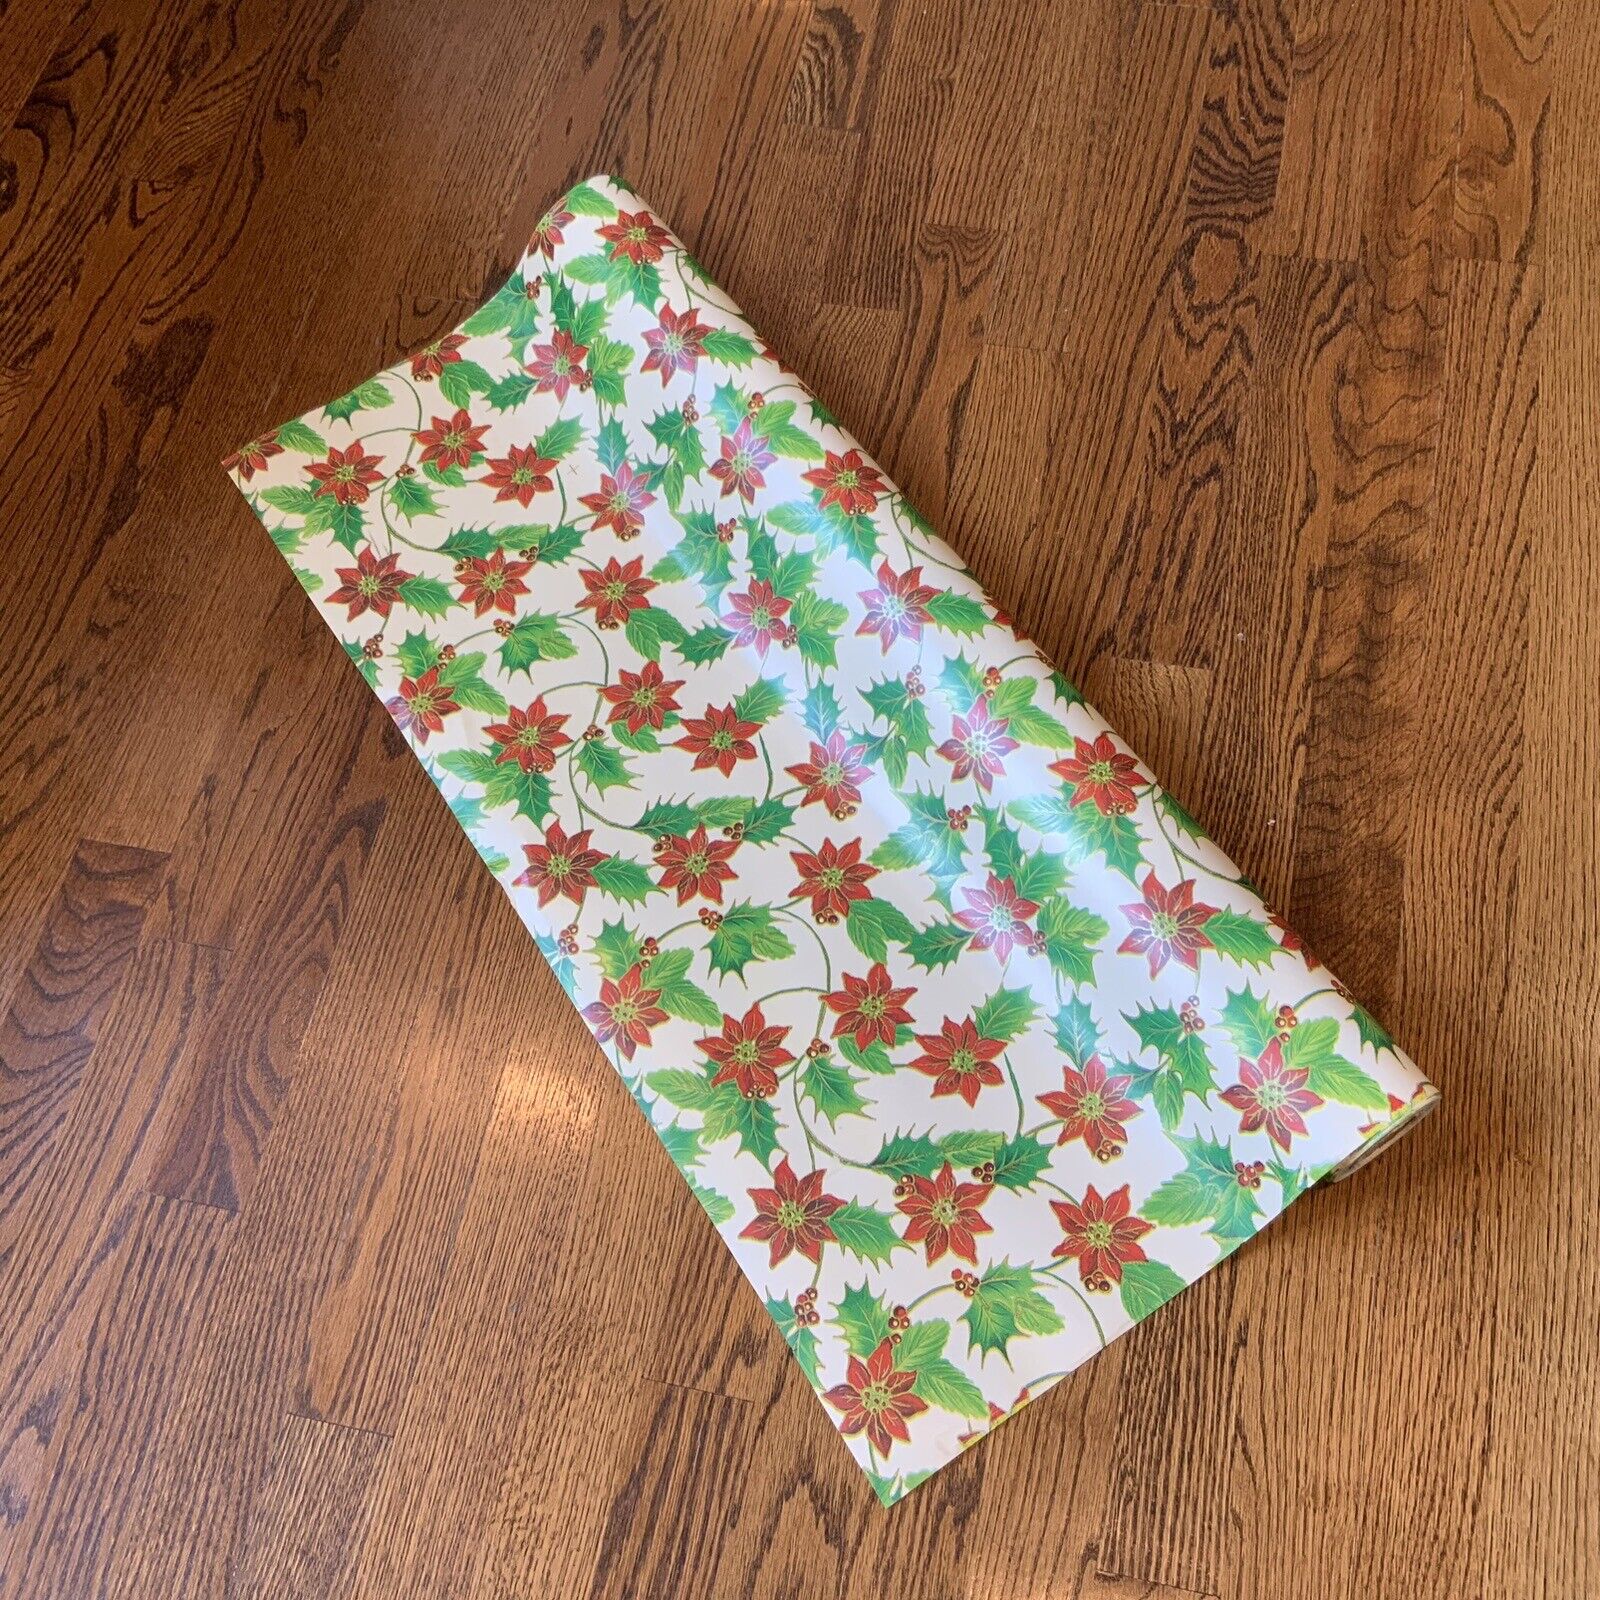 Retro CHRISTMAS Poinsettia Vintage Department Store Wrapping Paper Roll